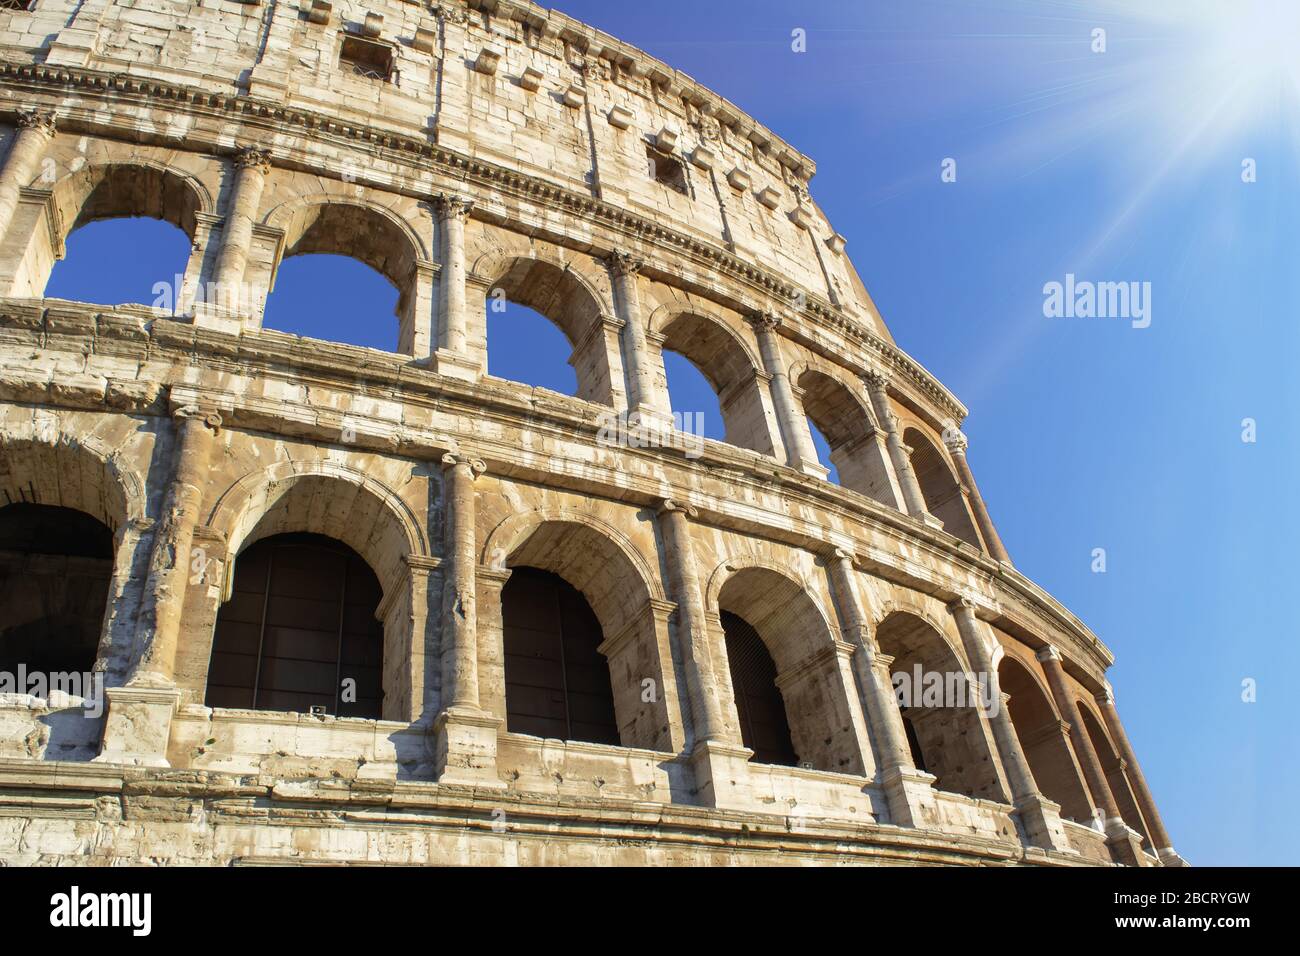 Colosseum at blue sky with sunlight. Rome ancient arena for gladiator fights in Italy Stock Photo